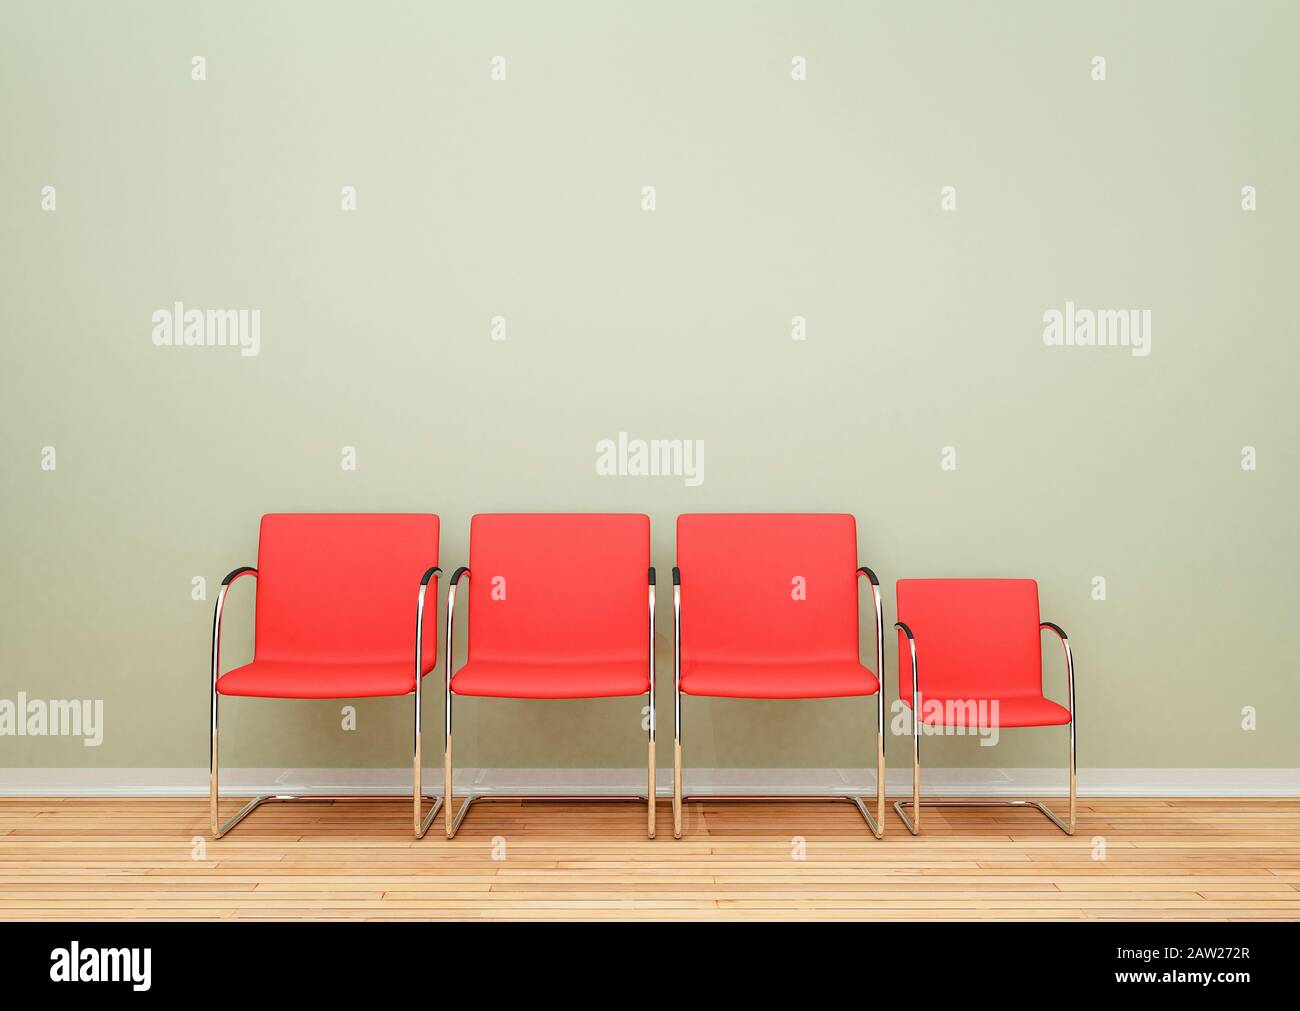 Three larger chairs and one smaller chair in a row in an empty room - difference concept Stock Photo